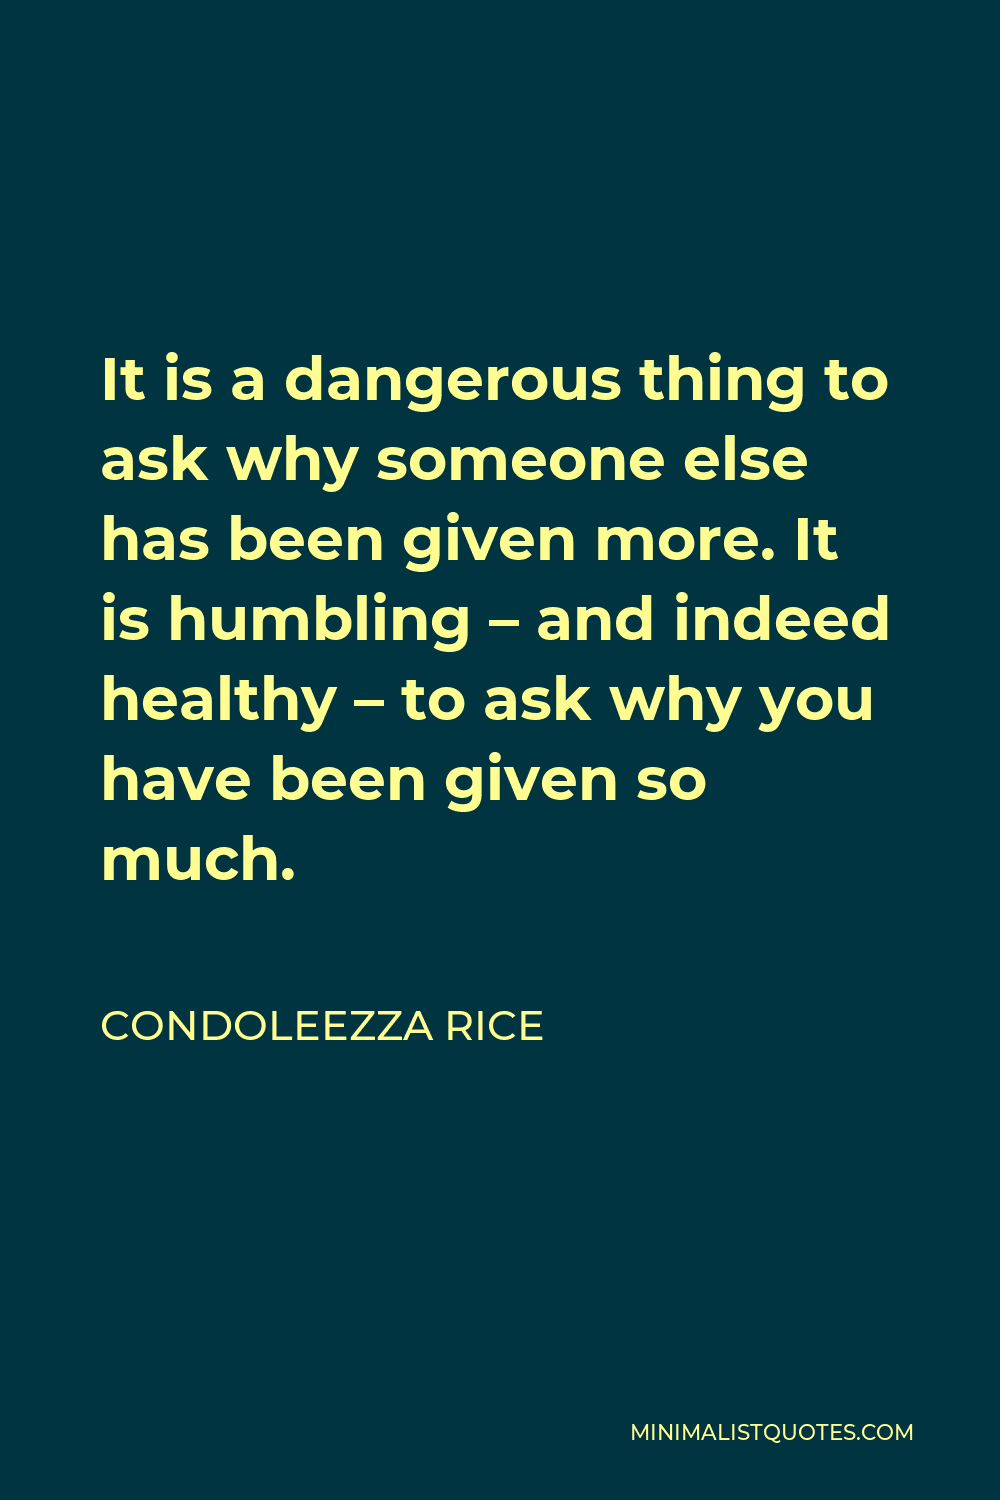 Condoleezza Rice Quote - It is a dangerous thing to ask why someone else has been given more. It is humbling – and indeed healthy – to ask why you have been given so much.